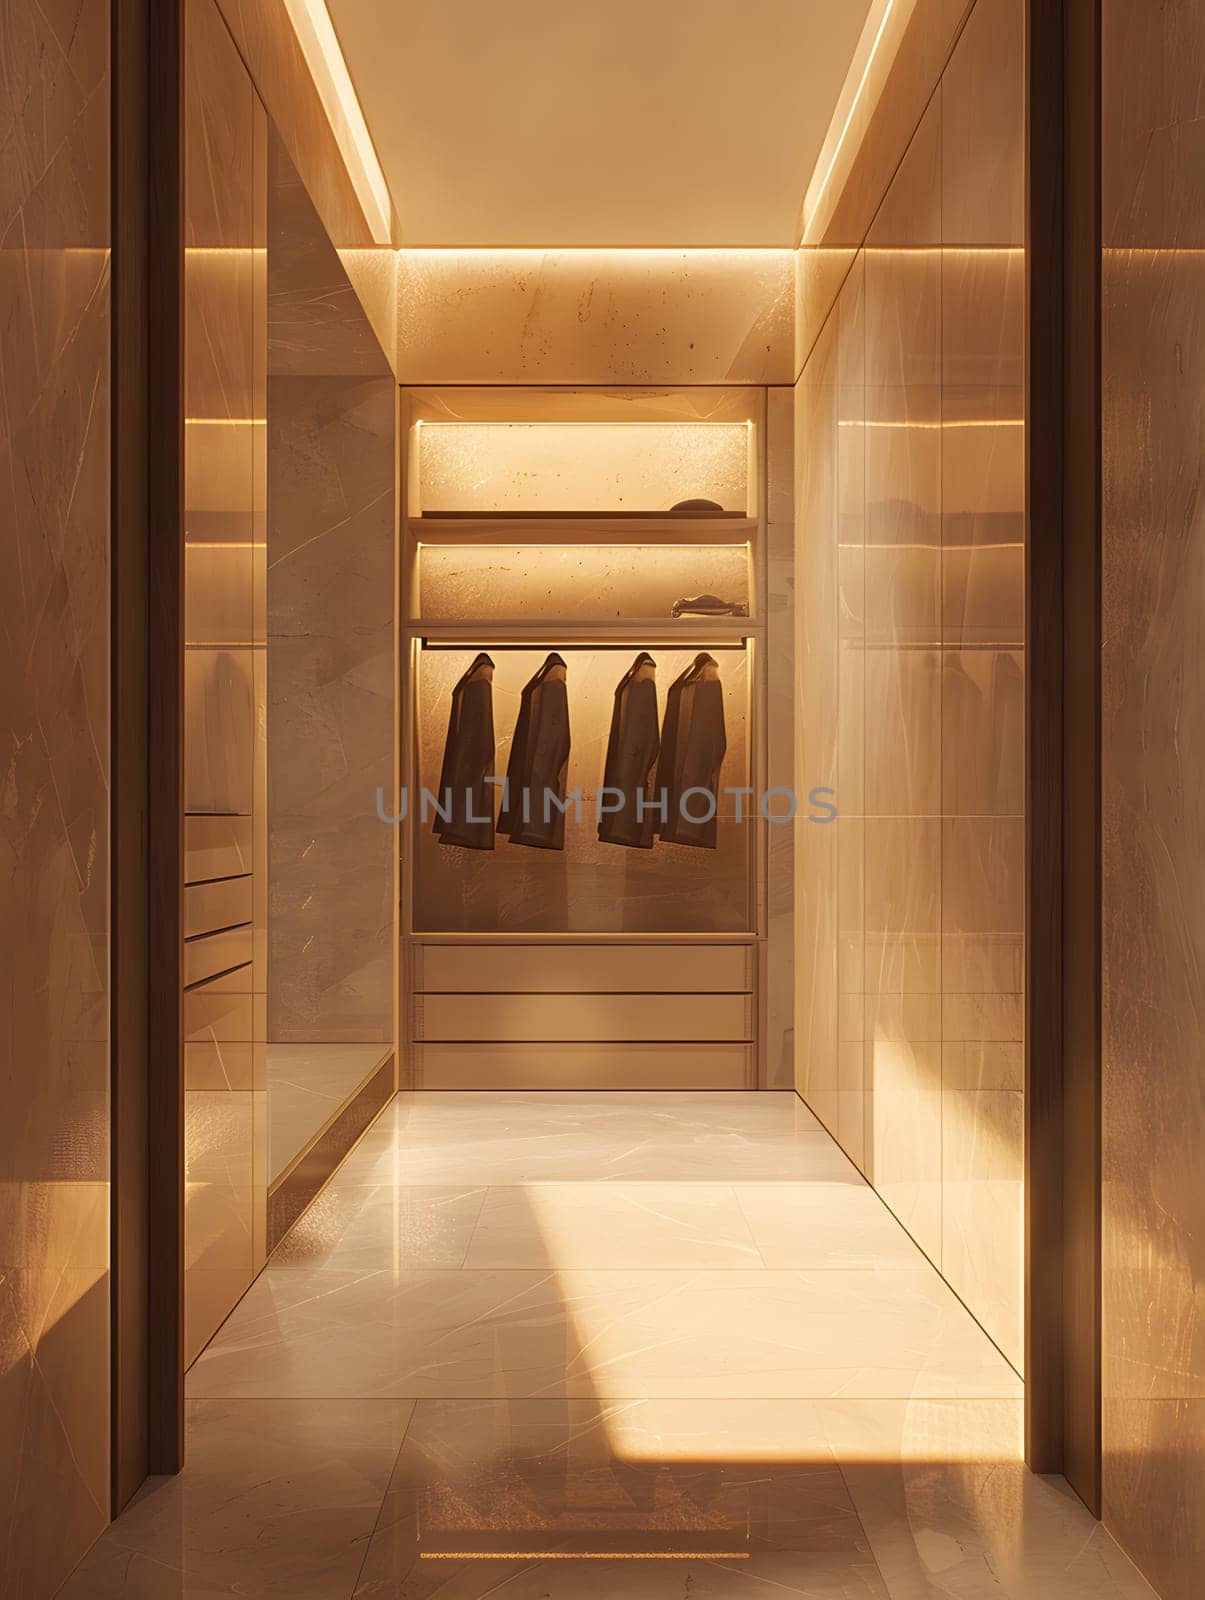 A walkin closet with wooden fixtures and hardwood flooring filled with an abundance of clothes hanging on racks, creating a transparent and organized space